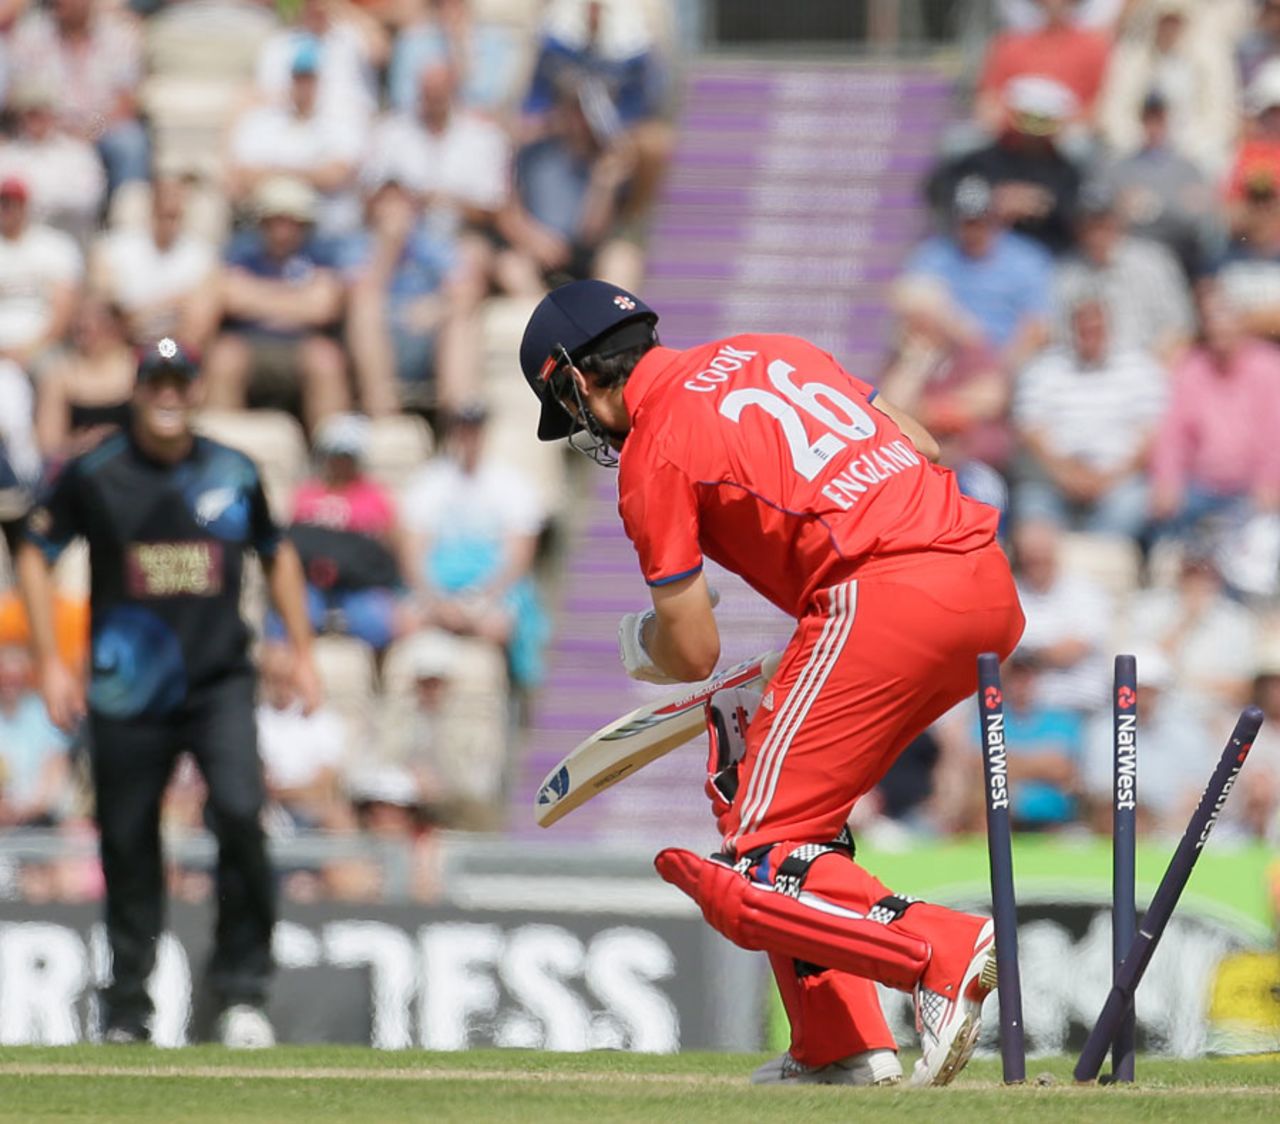 Alastair Cook loses his middle stump, England v New Zealand, 2nd ODI, Ageas Bowl, June 2, 2013